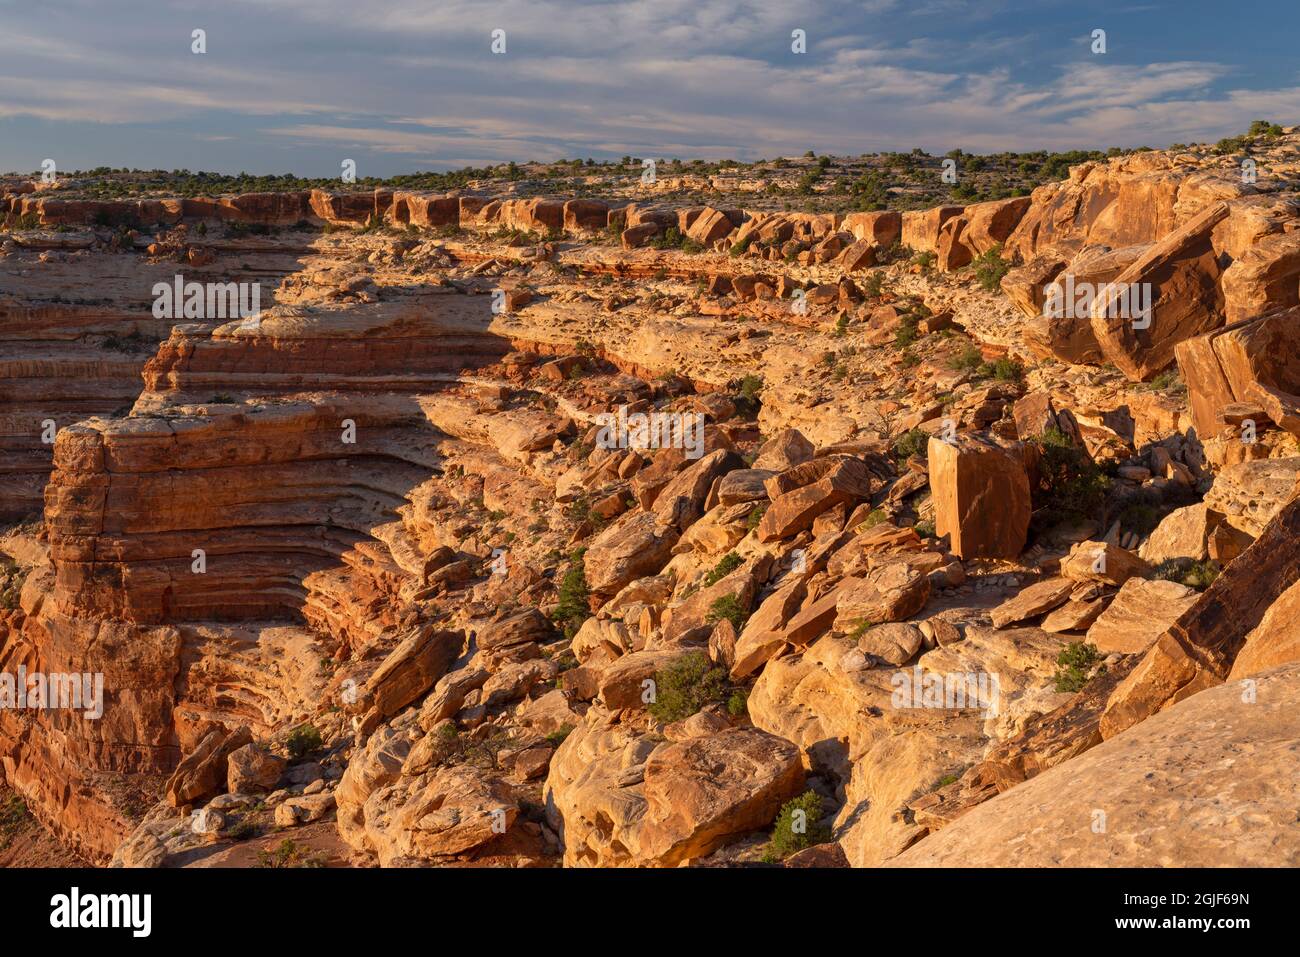 USA, Utah, Glen Canyon National Recreation Area, Colorful, eroded canyons above the San Juan River; view west from Muley Point. Stock Photo